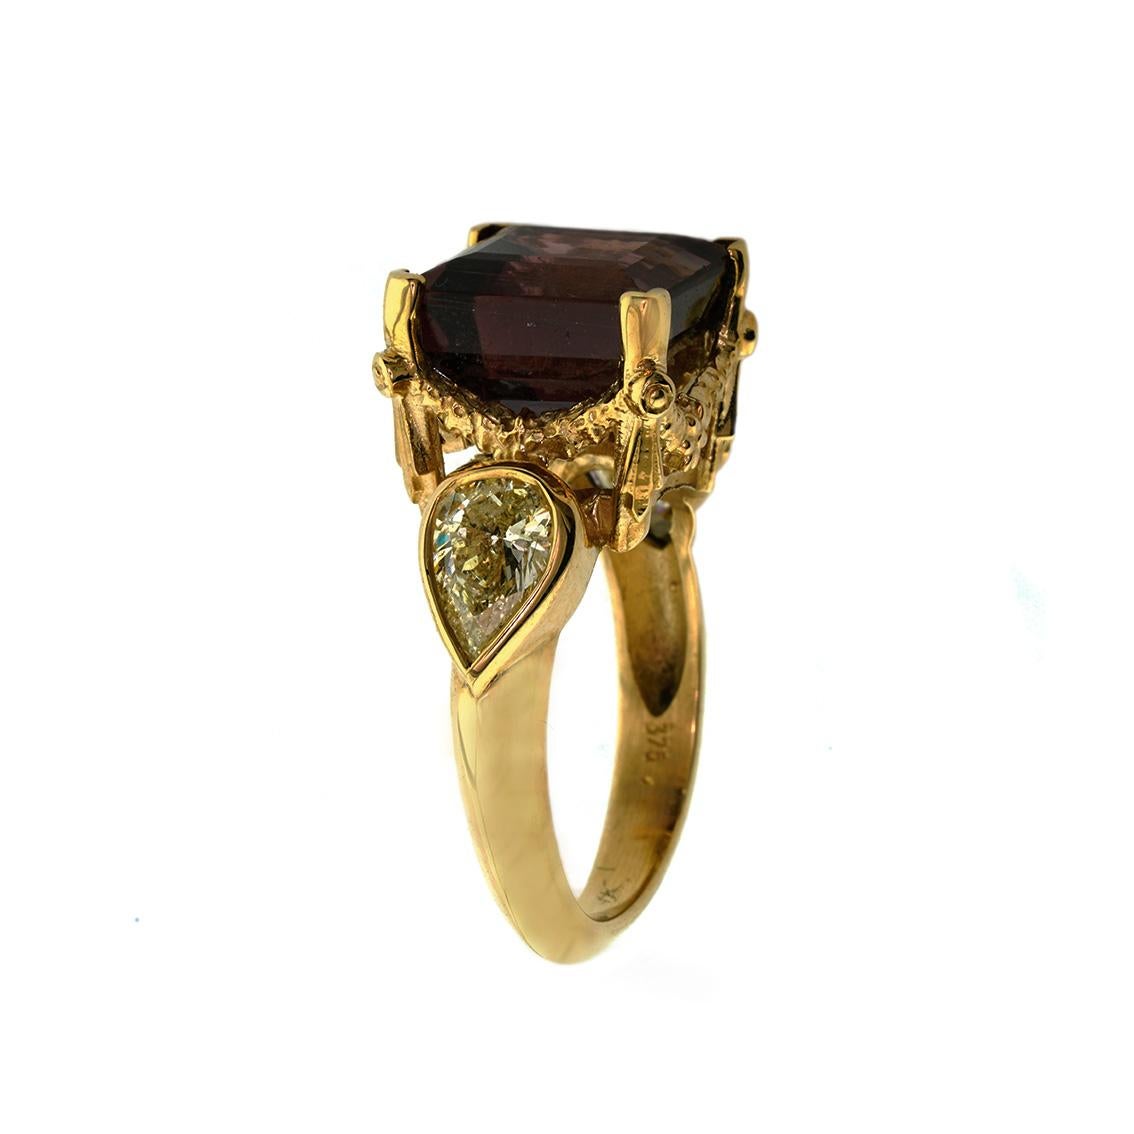 The Romantic Rites Ring is a stunning testament to love. 

Handmade in 9kt yellow gold this glorious ring features a divine, 11mm, square tourmaline.

The tourmaline is set in a signature William Llewellyn Griffiths garland setting and is flanked by